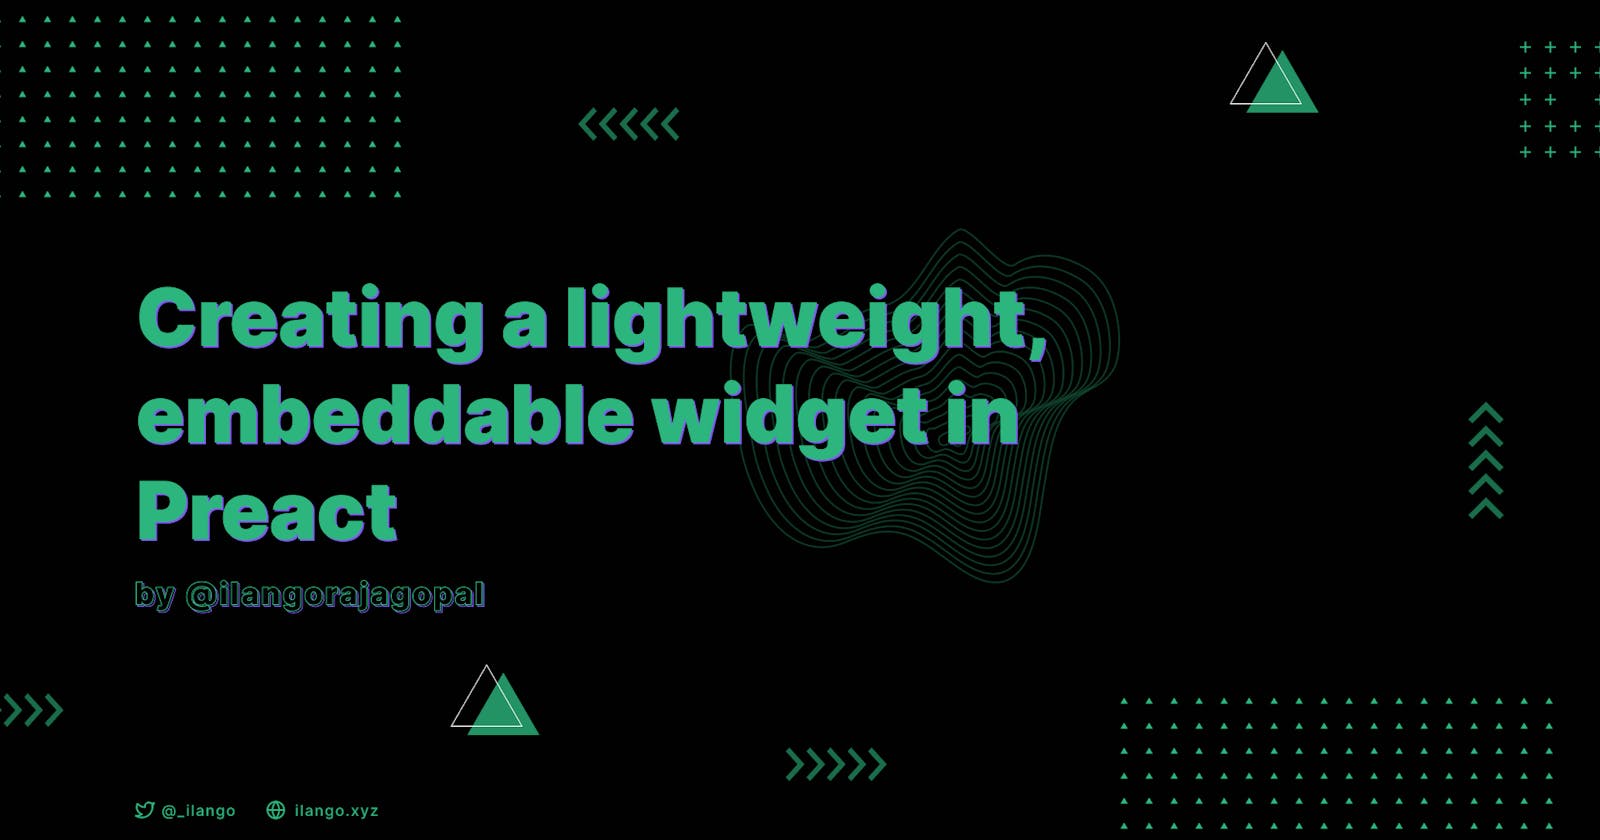 Creating a lightweight, embeddable widget in Preact